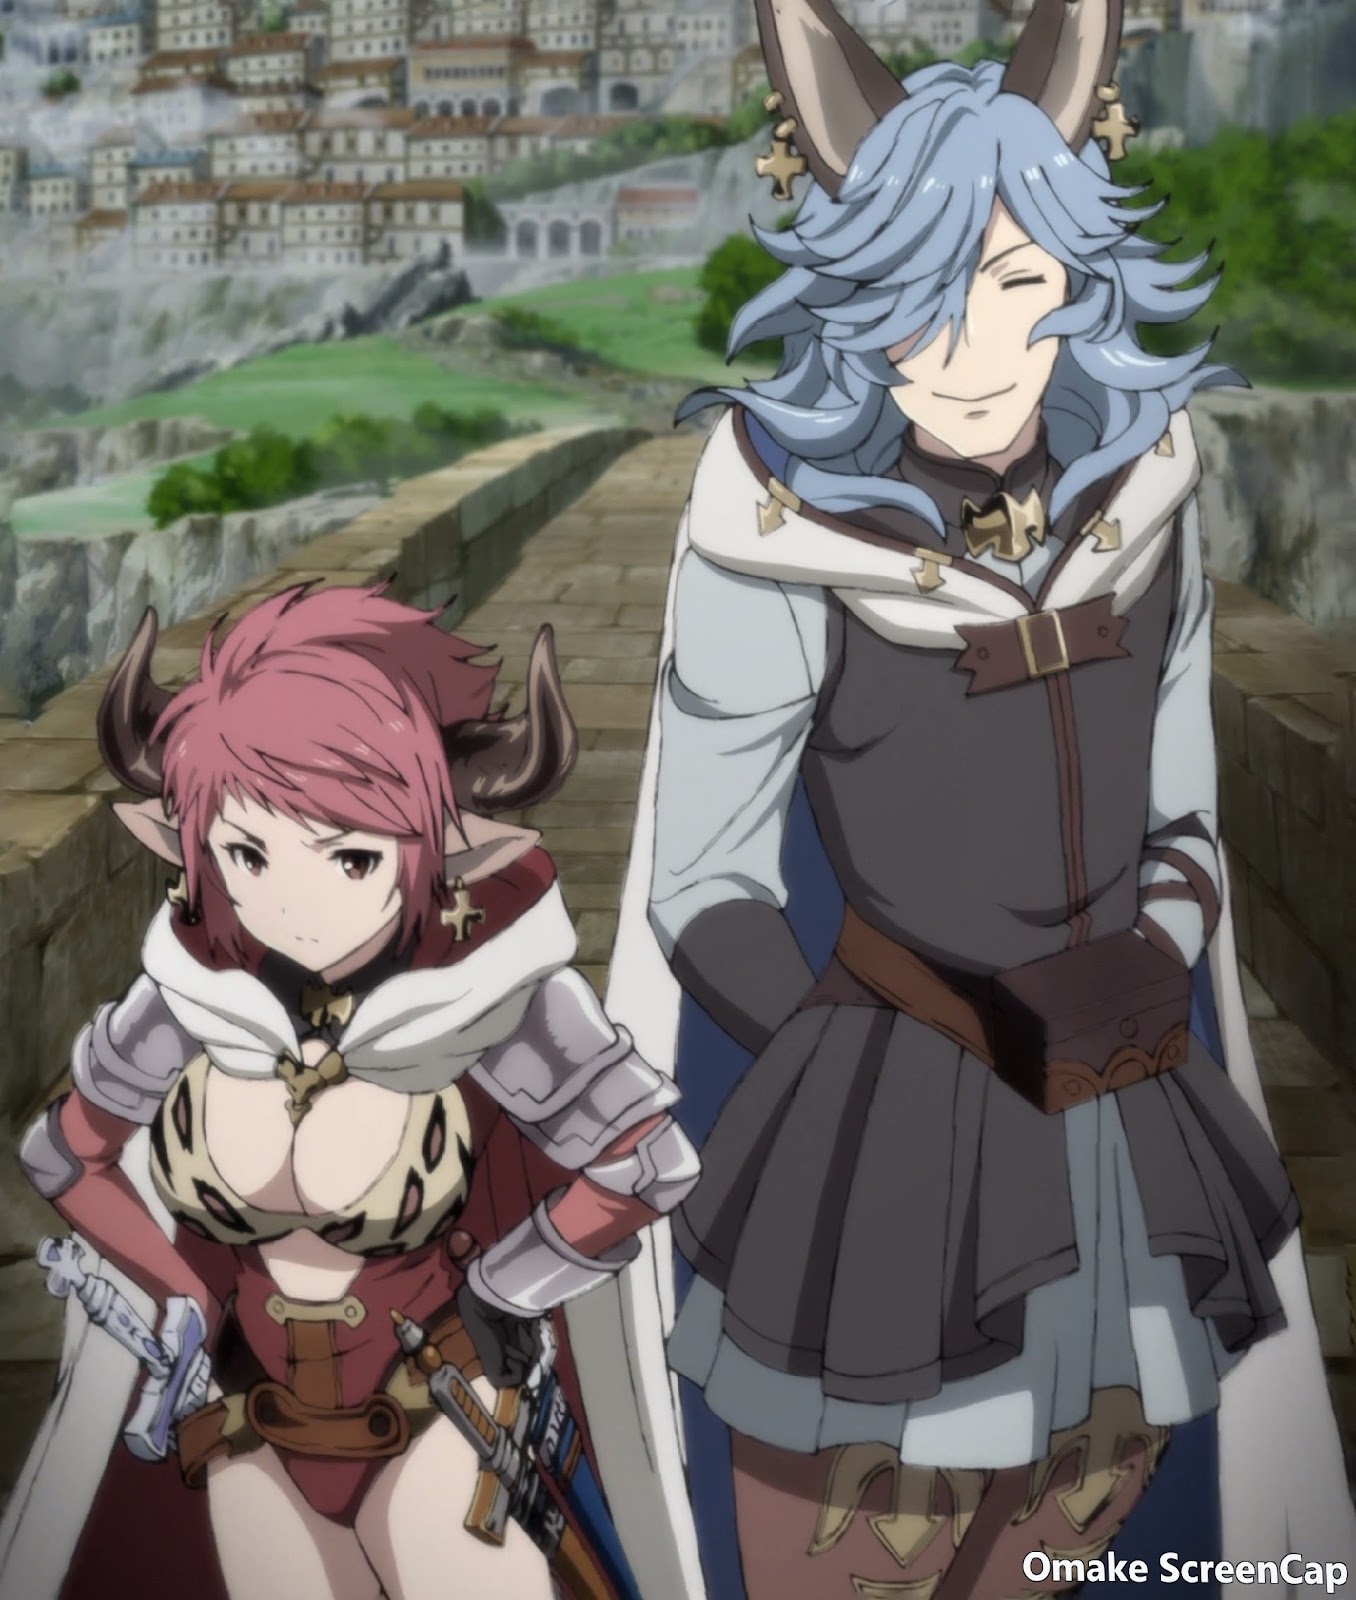 Joeschmo's Gears and Grounds: Omake Gif Anime - Granblue Fantasy The  Animation - Episode 4 - Sturm Blades Out